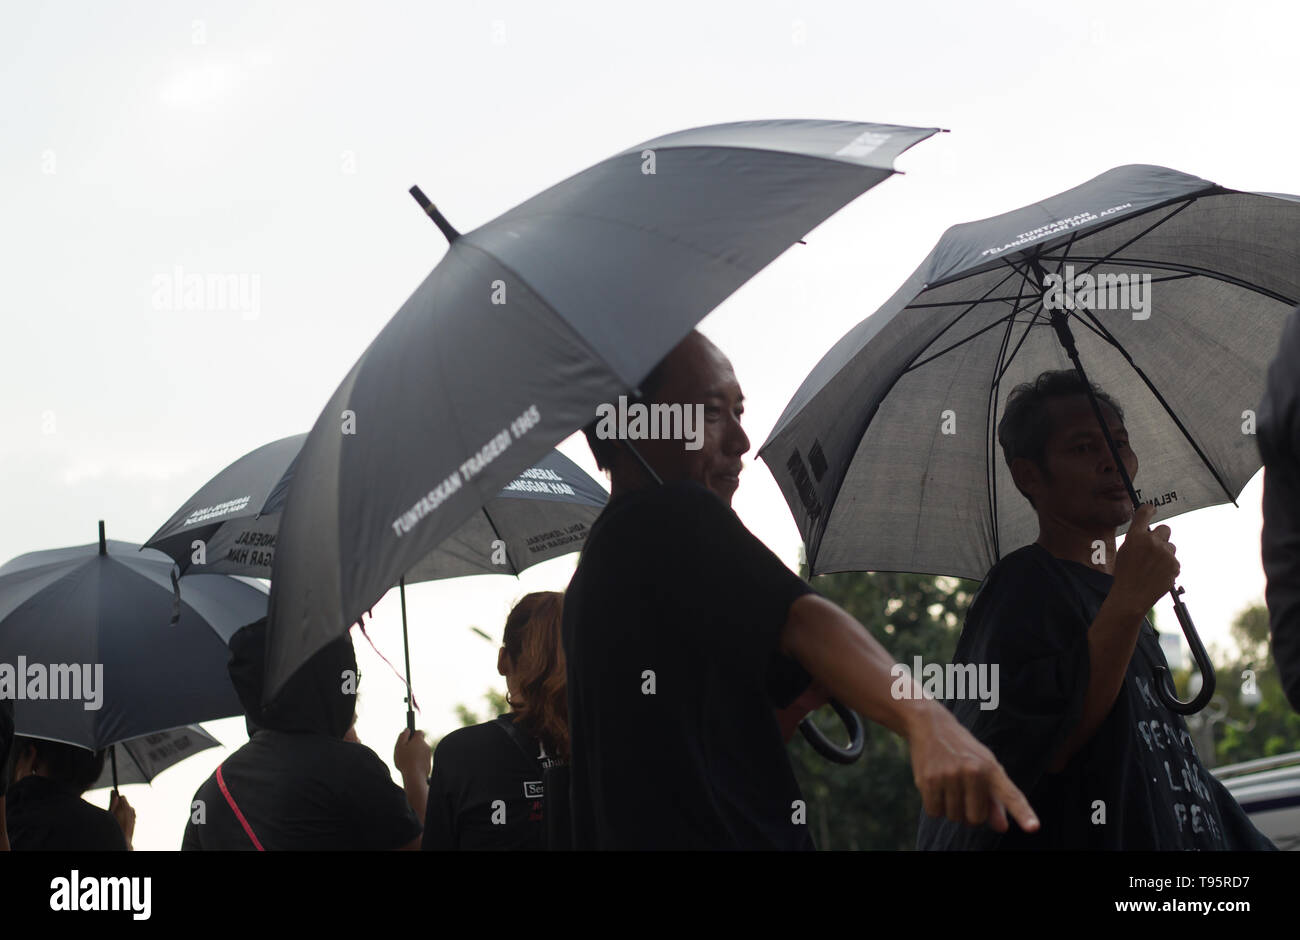 Jakarta, Jakarta, Indonesia. 16th May, 2019. Demonstrators seen with black umbrellas during the protest.The Victim Solidarity Network for Justice (JSKK) held a silent protest in front of the Presidential Palace in Jakarta. The act is commonly known as Aksi Kamisan and this was its 586th day and the demand is for the President to resolve human rights violations in the May 1998 Tragedy: Trisakti - Semanggi I - Semanggi II and May 13-15 1998 Riots. Credit: Nick Hanoatubun/SOPA Images/ZUMA Wire/Alamy Live News Stock Photo